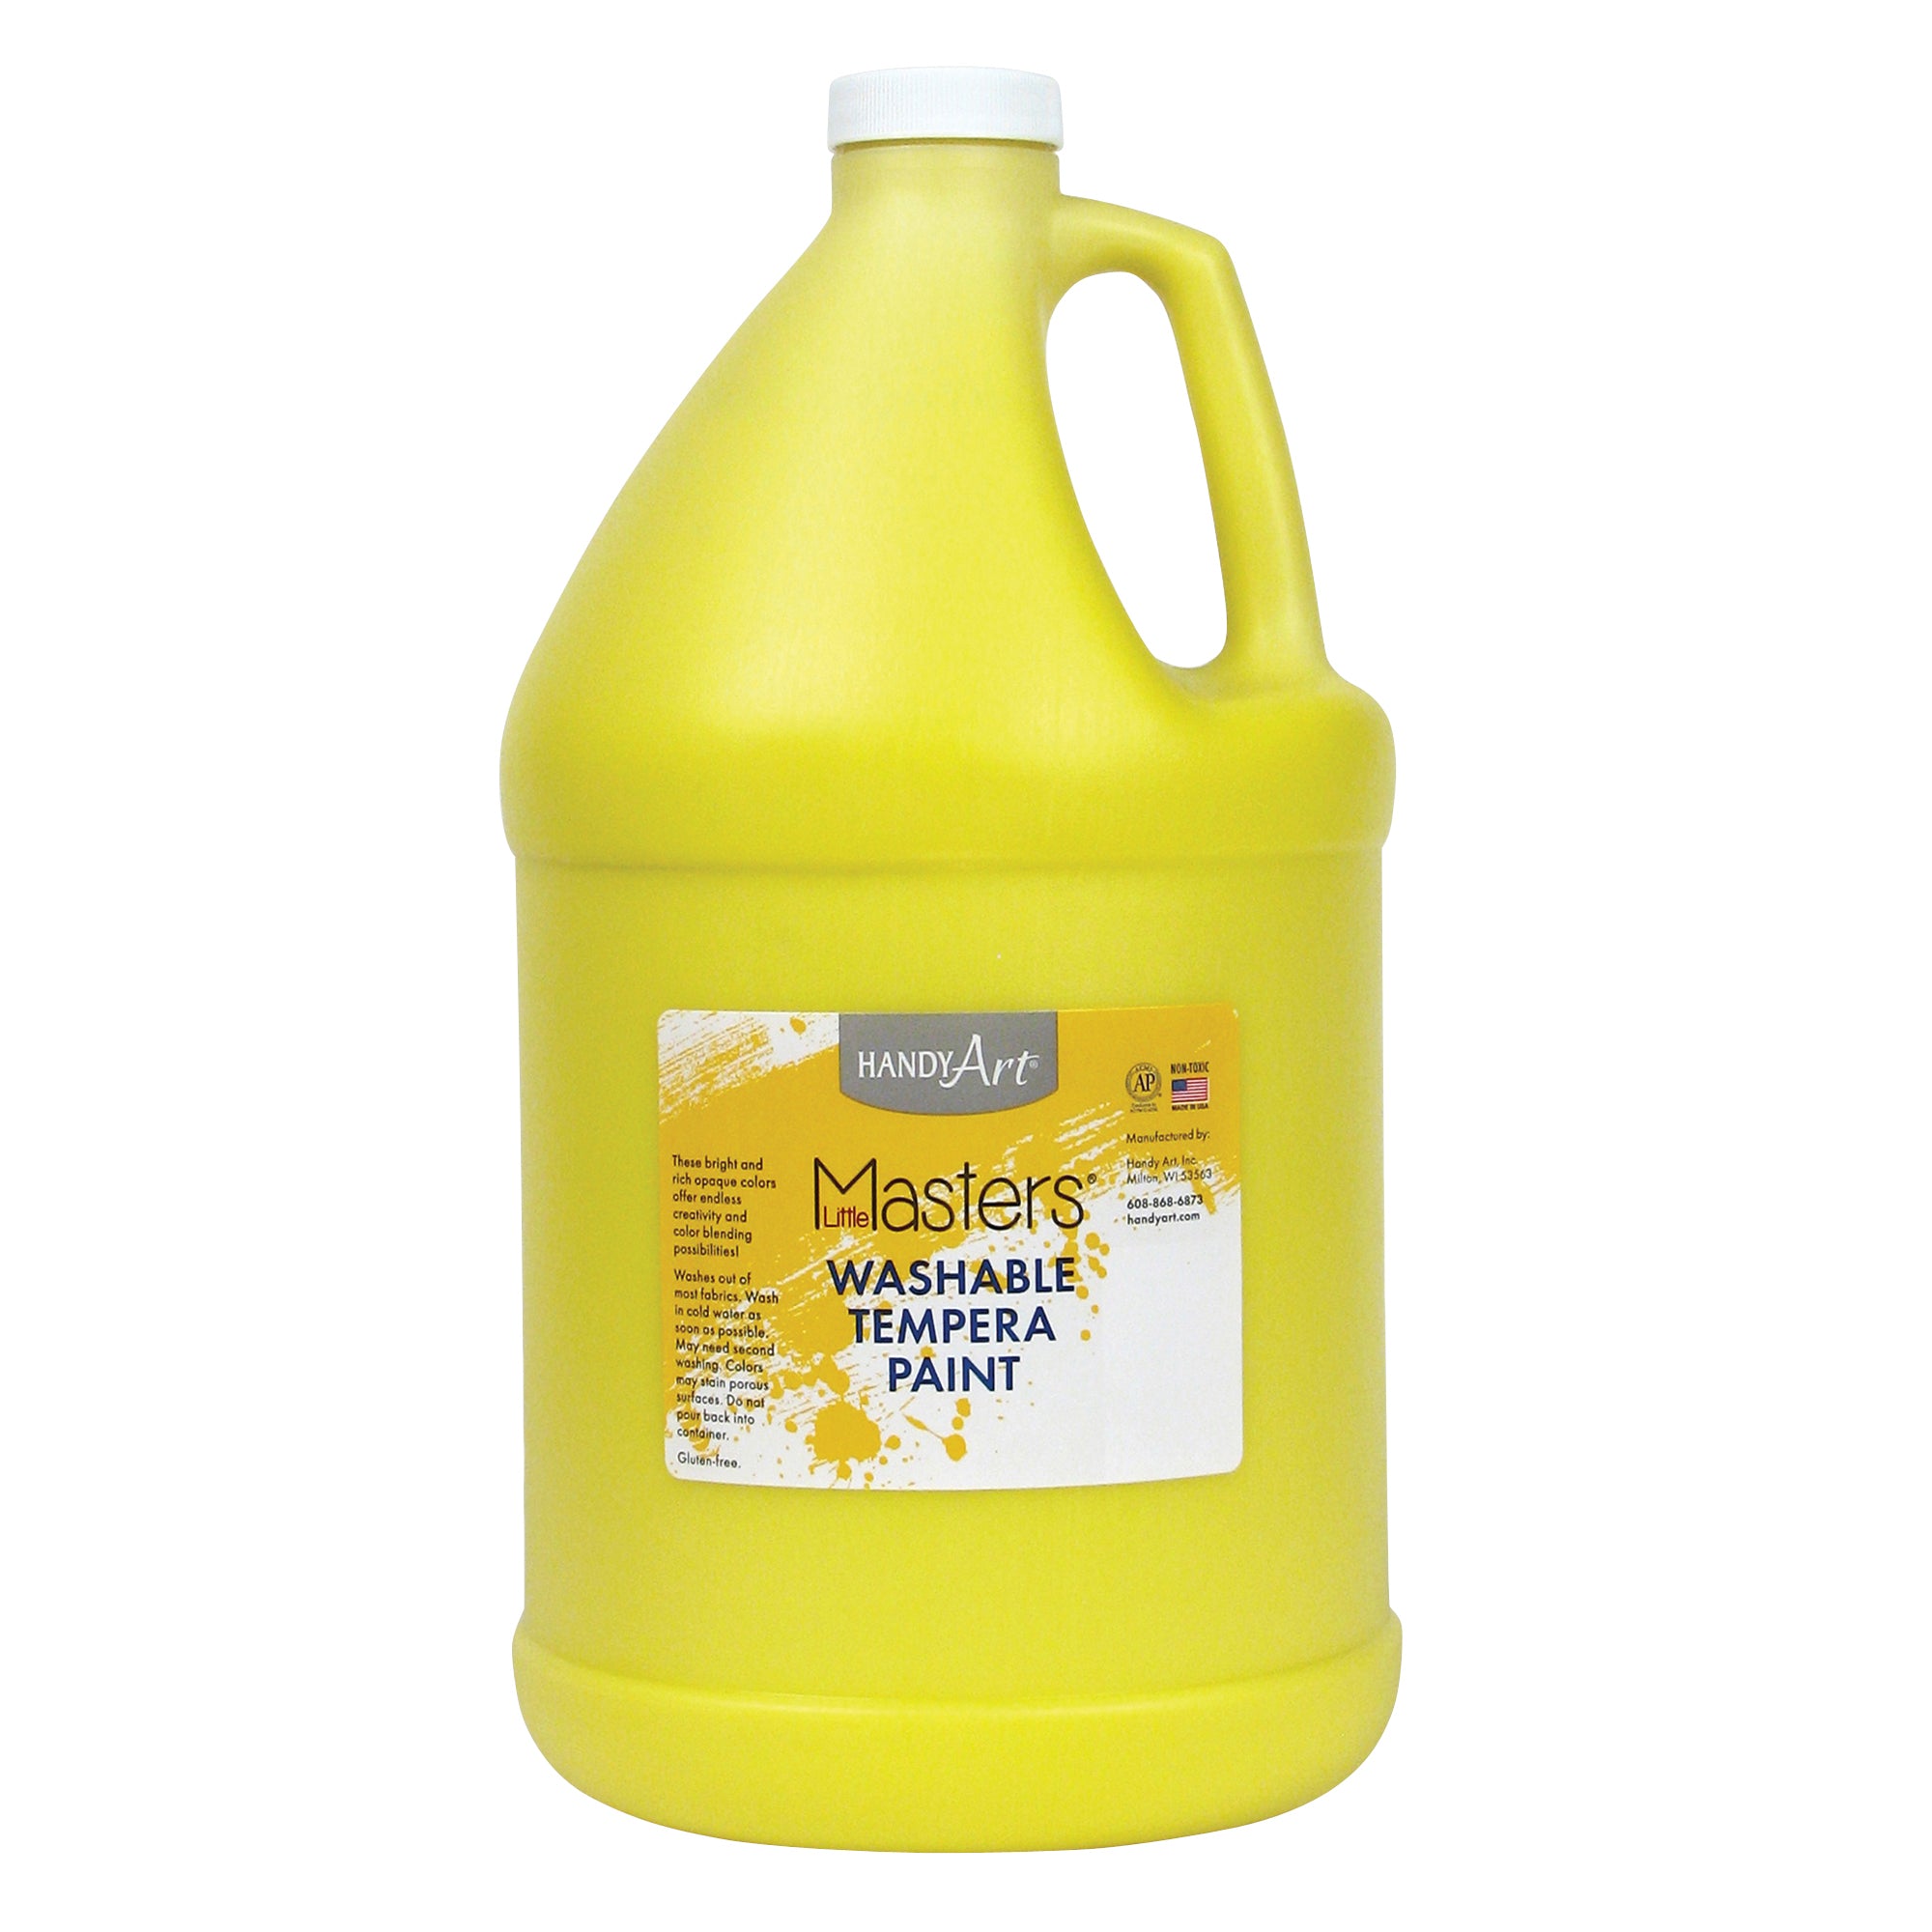 Little Masters® Washable Tempera Paint, Yellow, Gallon